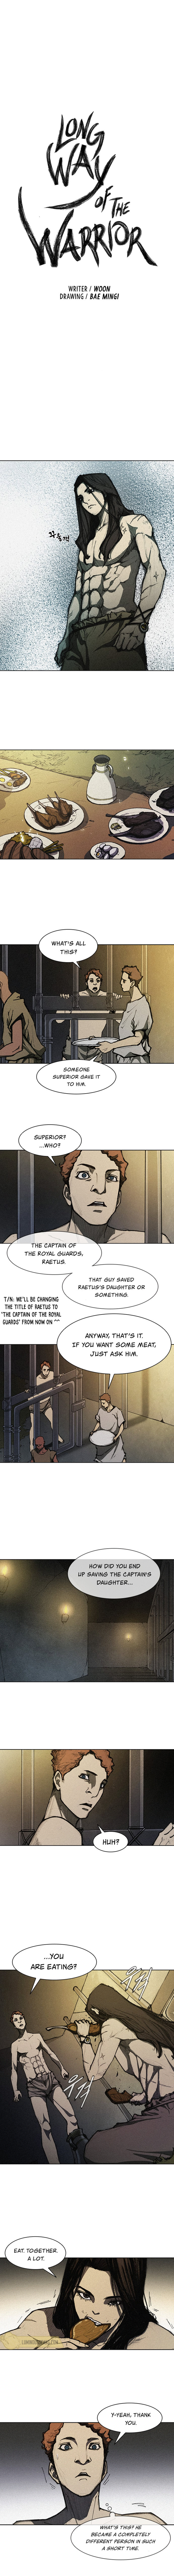 Long Way of the Warrior - Chapter 12 Page 2